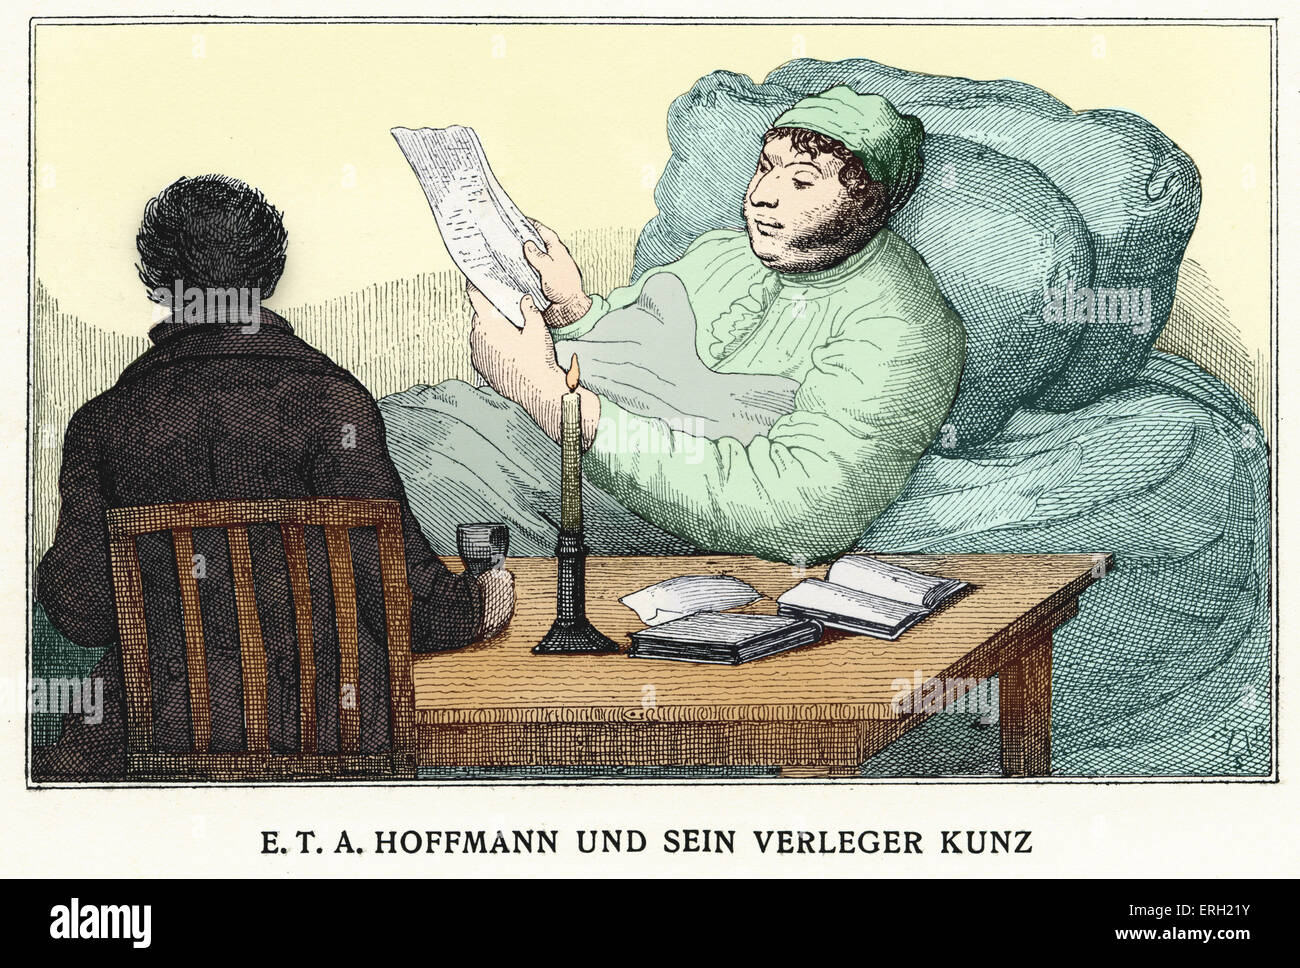 E.T.A. Hoffmann with his publisher Kunz. German Romantic author of fantasy and horror, 24 January 1776 - 25 June 1822. Stock Photo